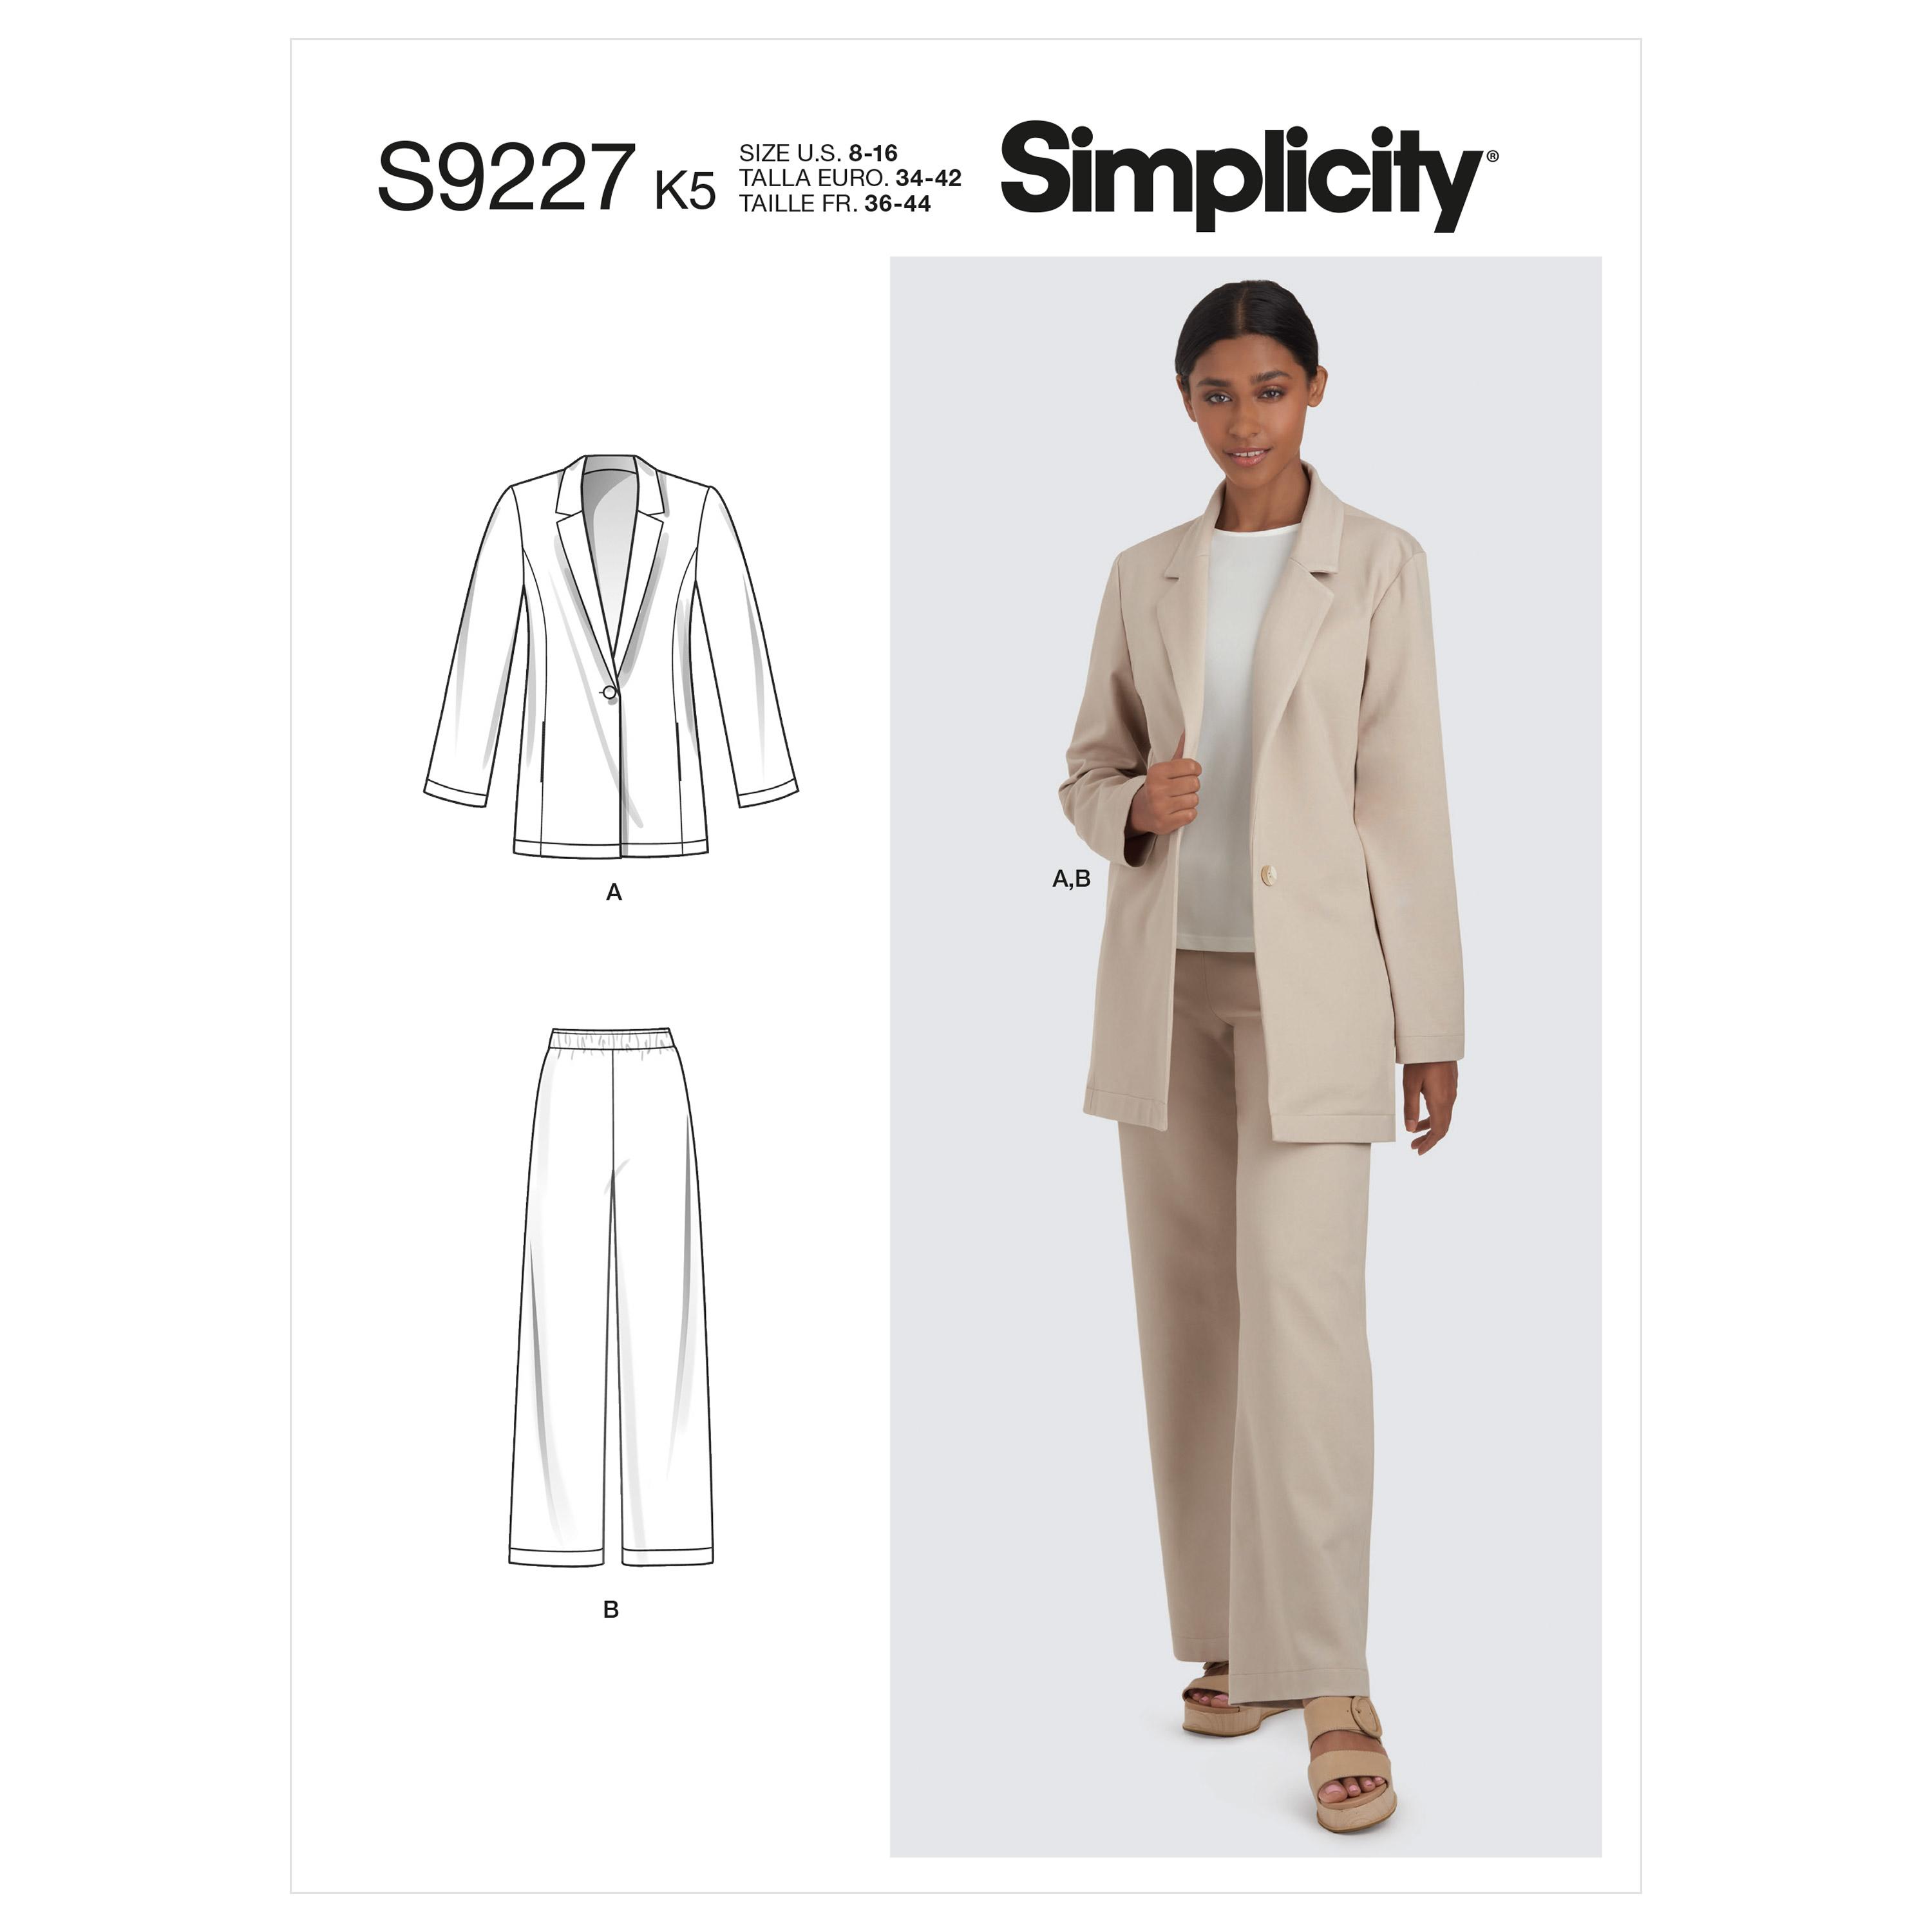 Simplicity Sewing Pattern S9227 Misses' Jacket & Pants